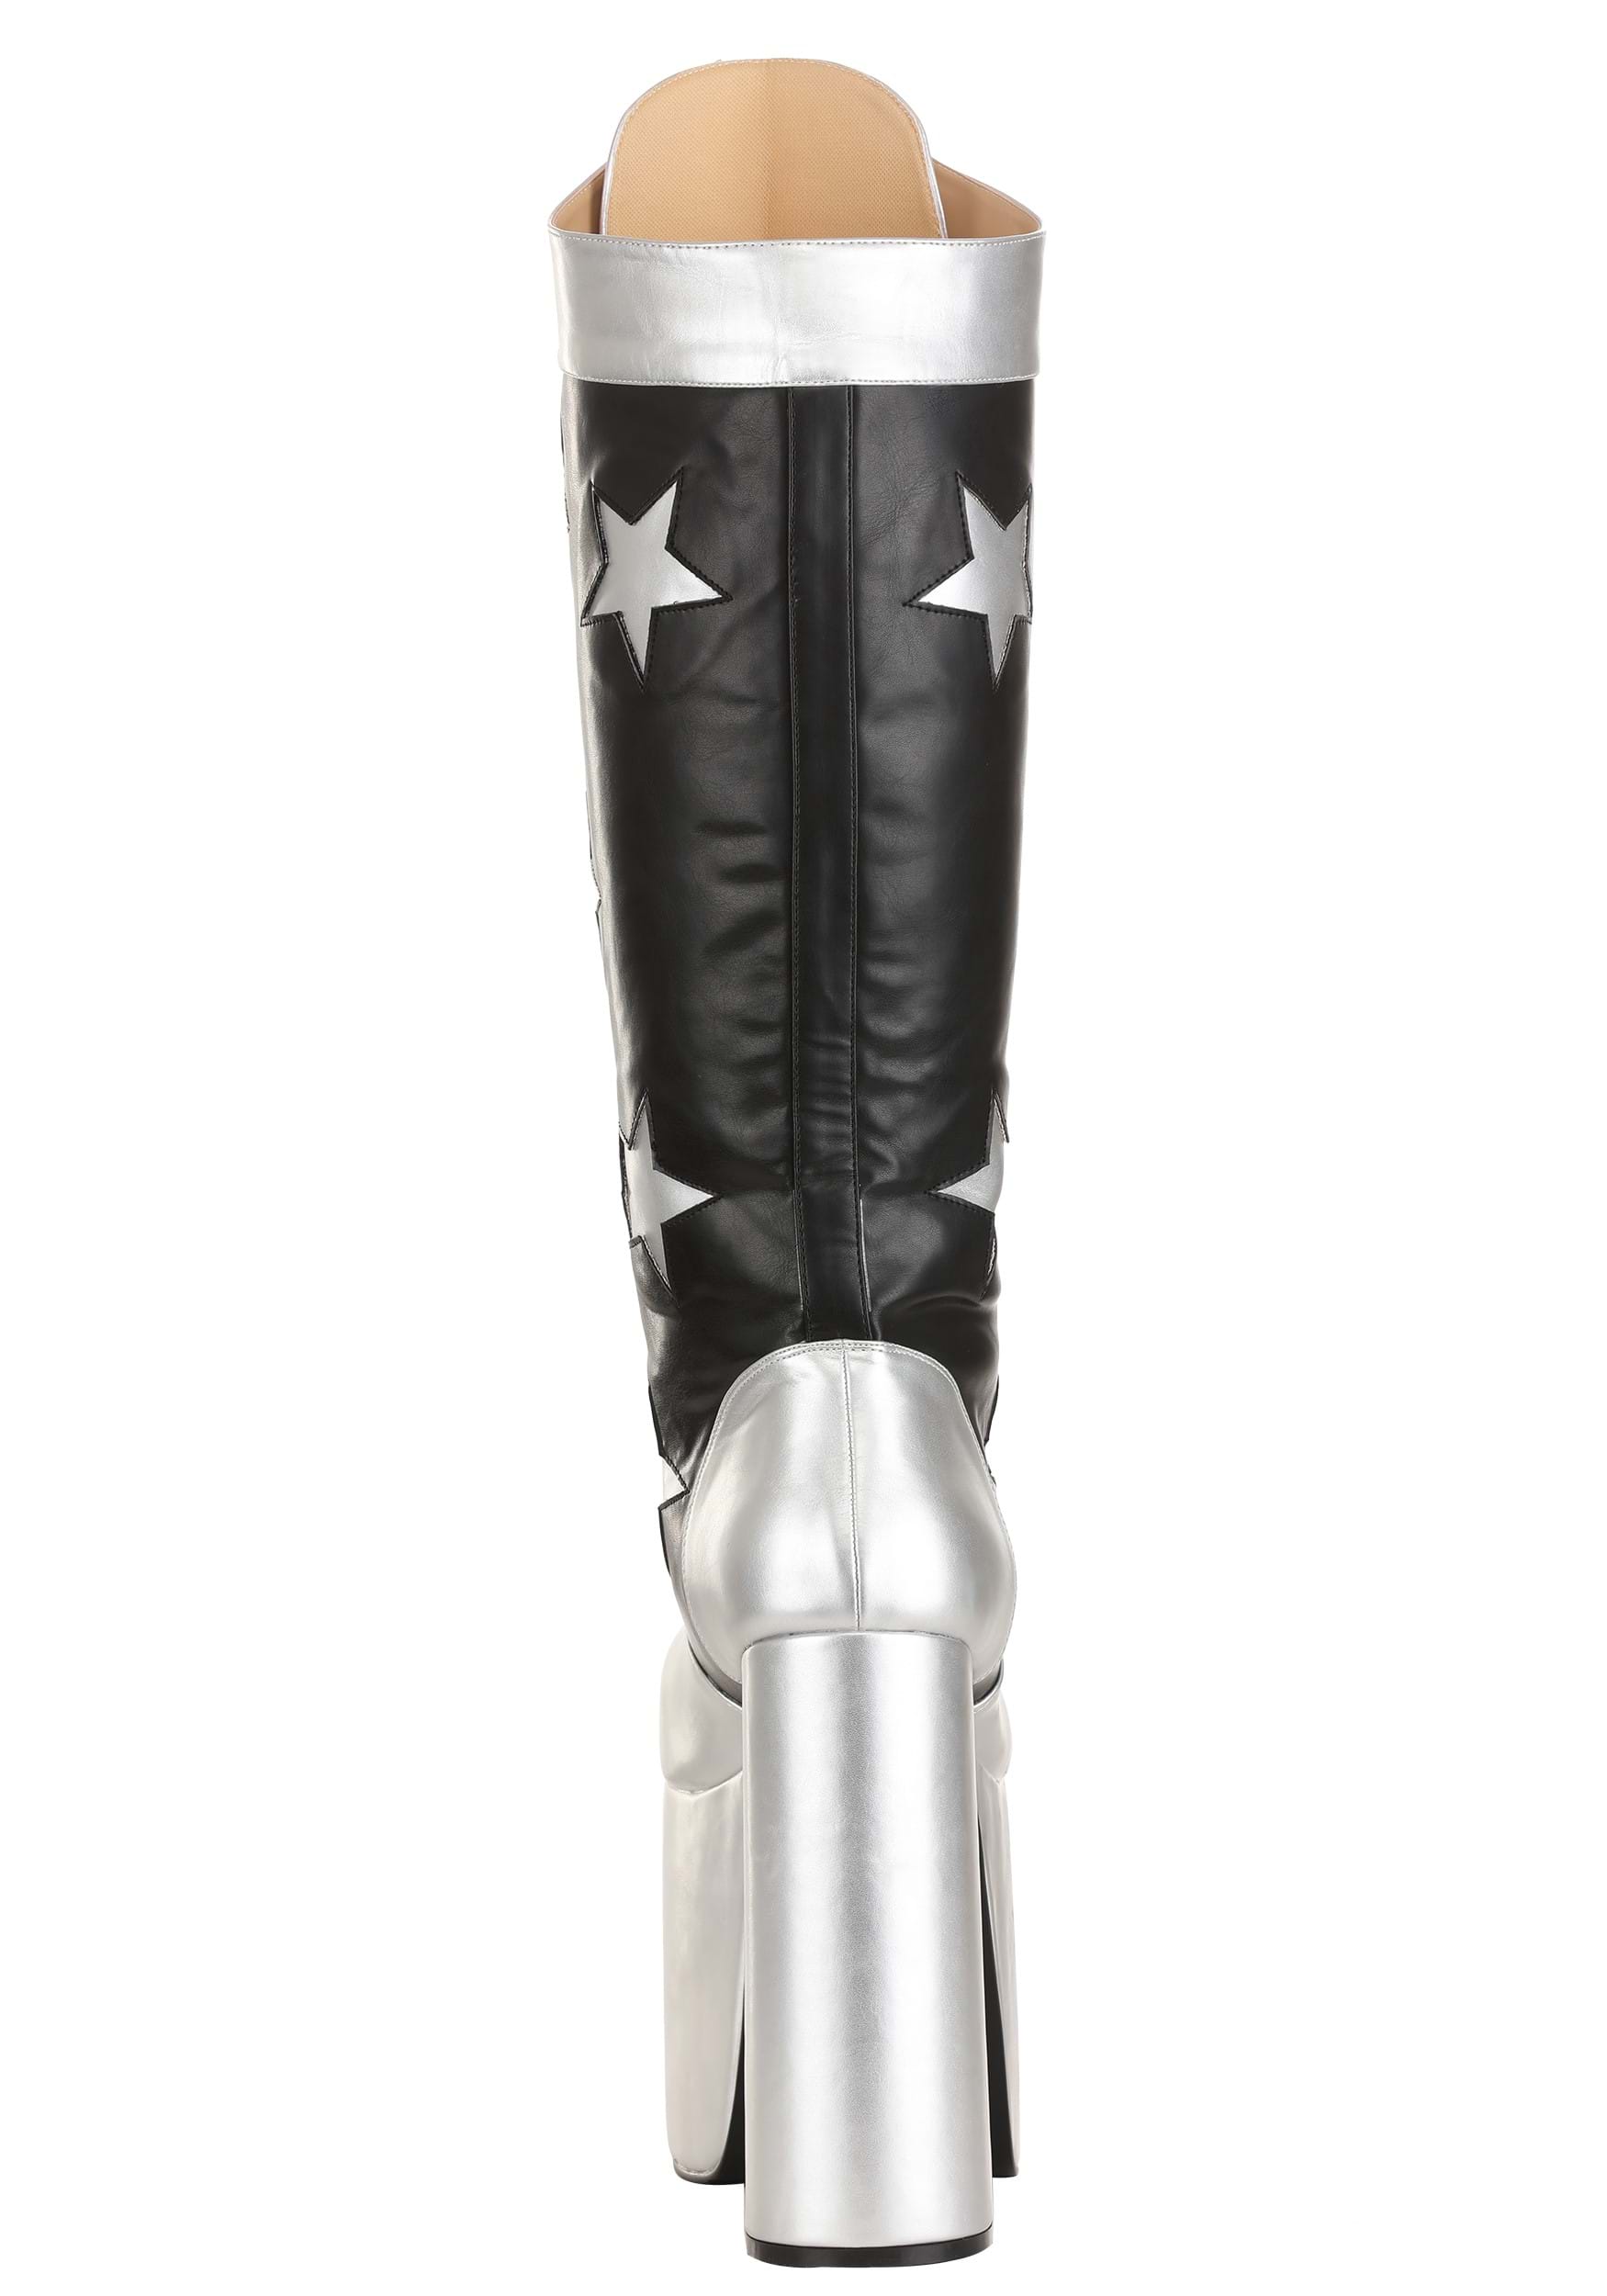 KISS Starchild Boots , Exclusive Costume Boots